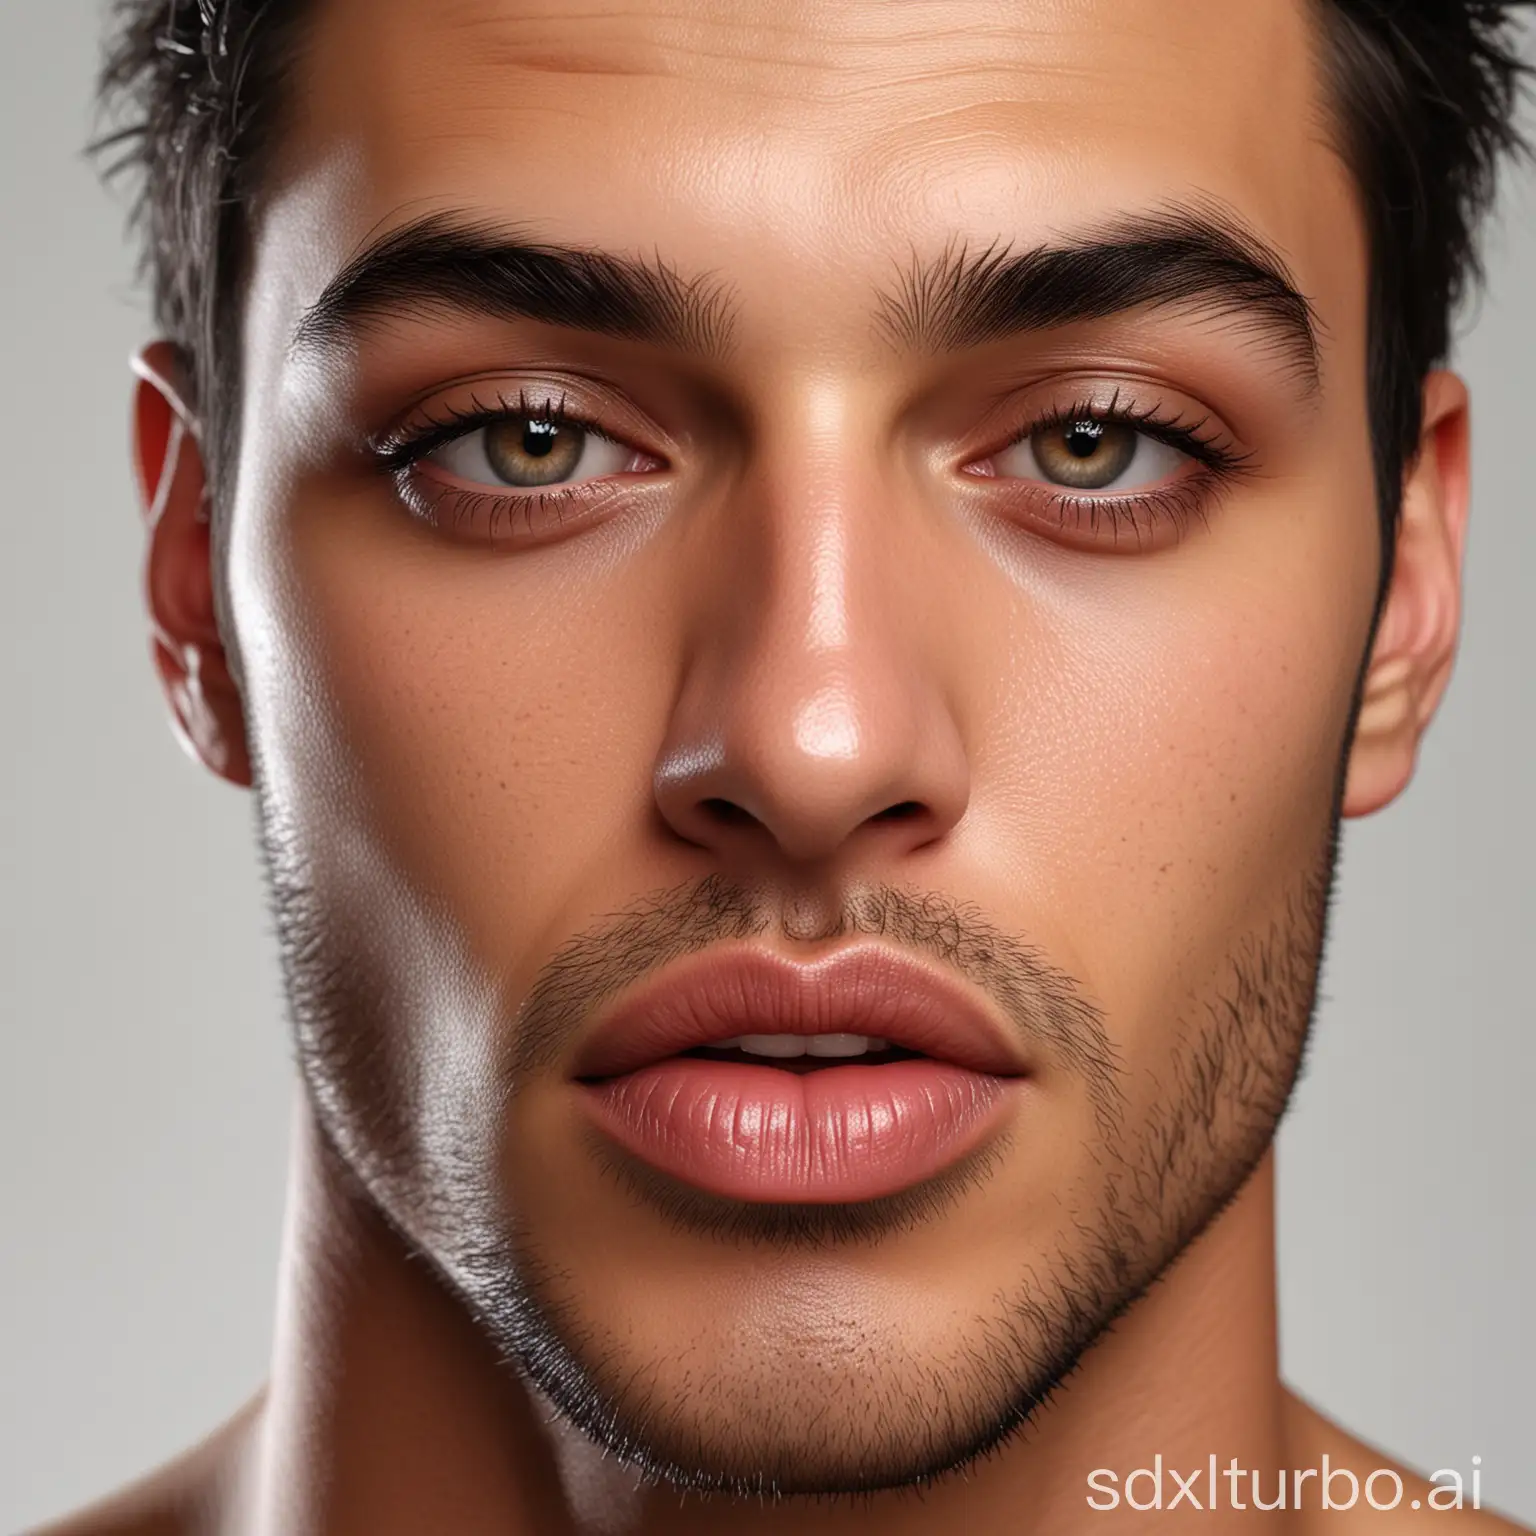 Realistic-Latino-Male-Model-Portrait-with-Perfect-Features-and-Studio-Lighting